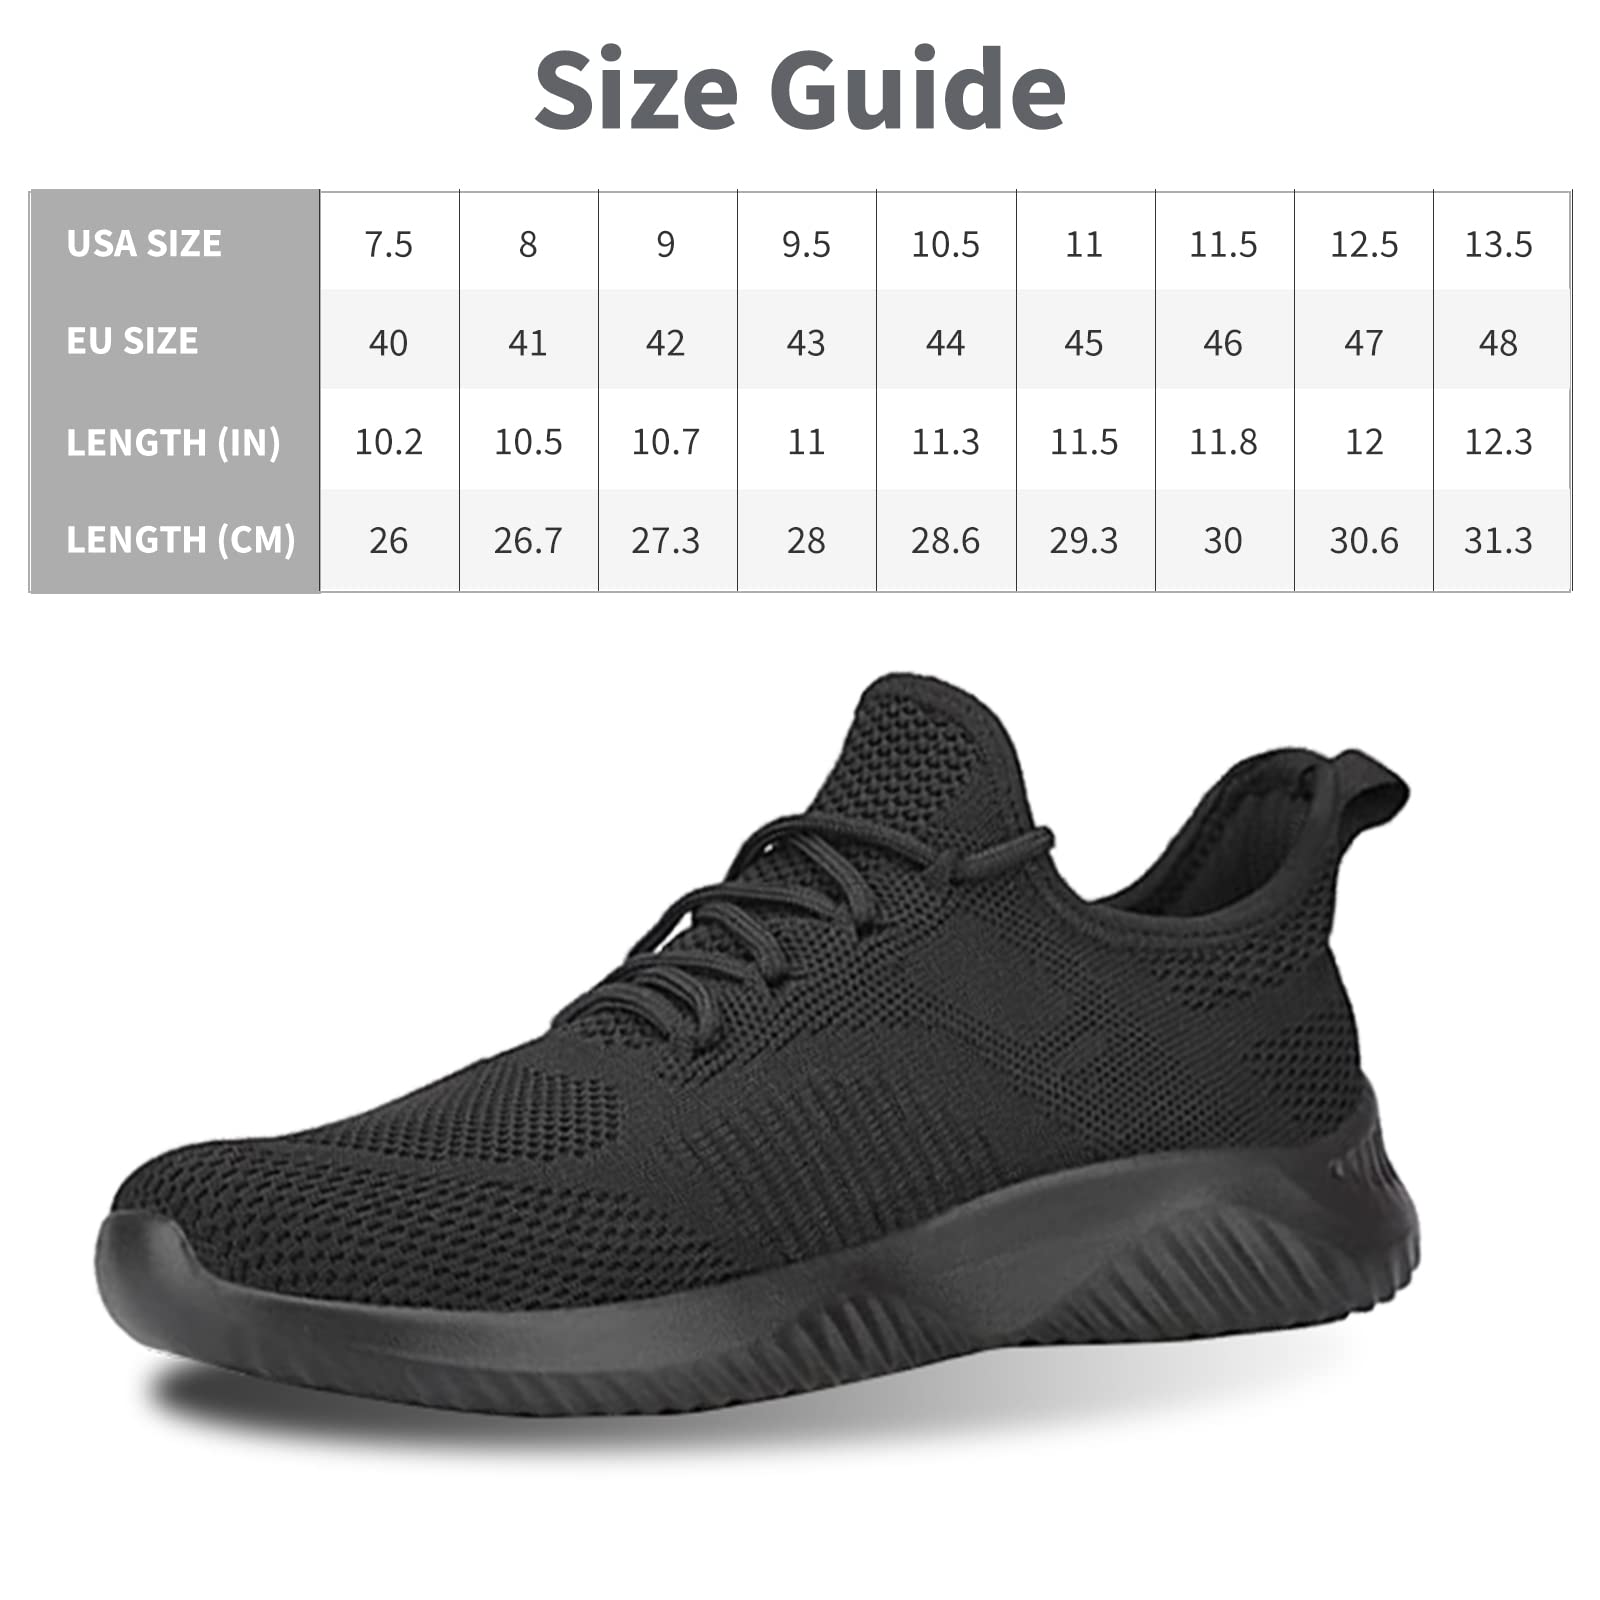 Rospick Slip On Men's Sneakers, Walking Shoes for Men Fashion Lightweight Breathable Running Shoes Sport Athletic Tennis Shoes